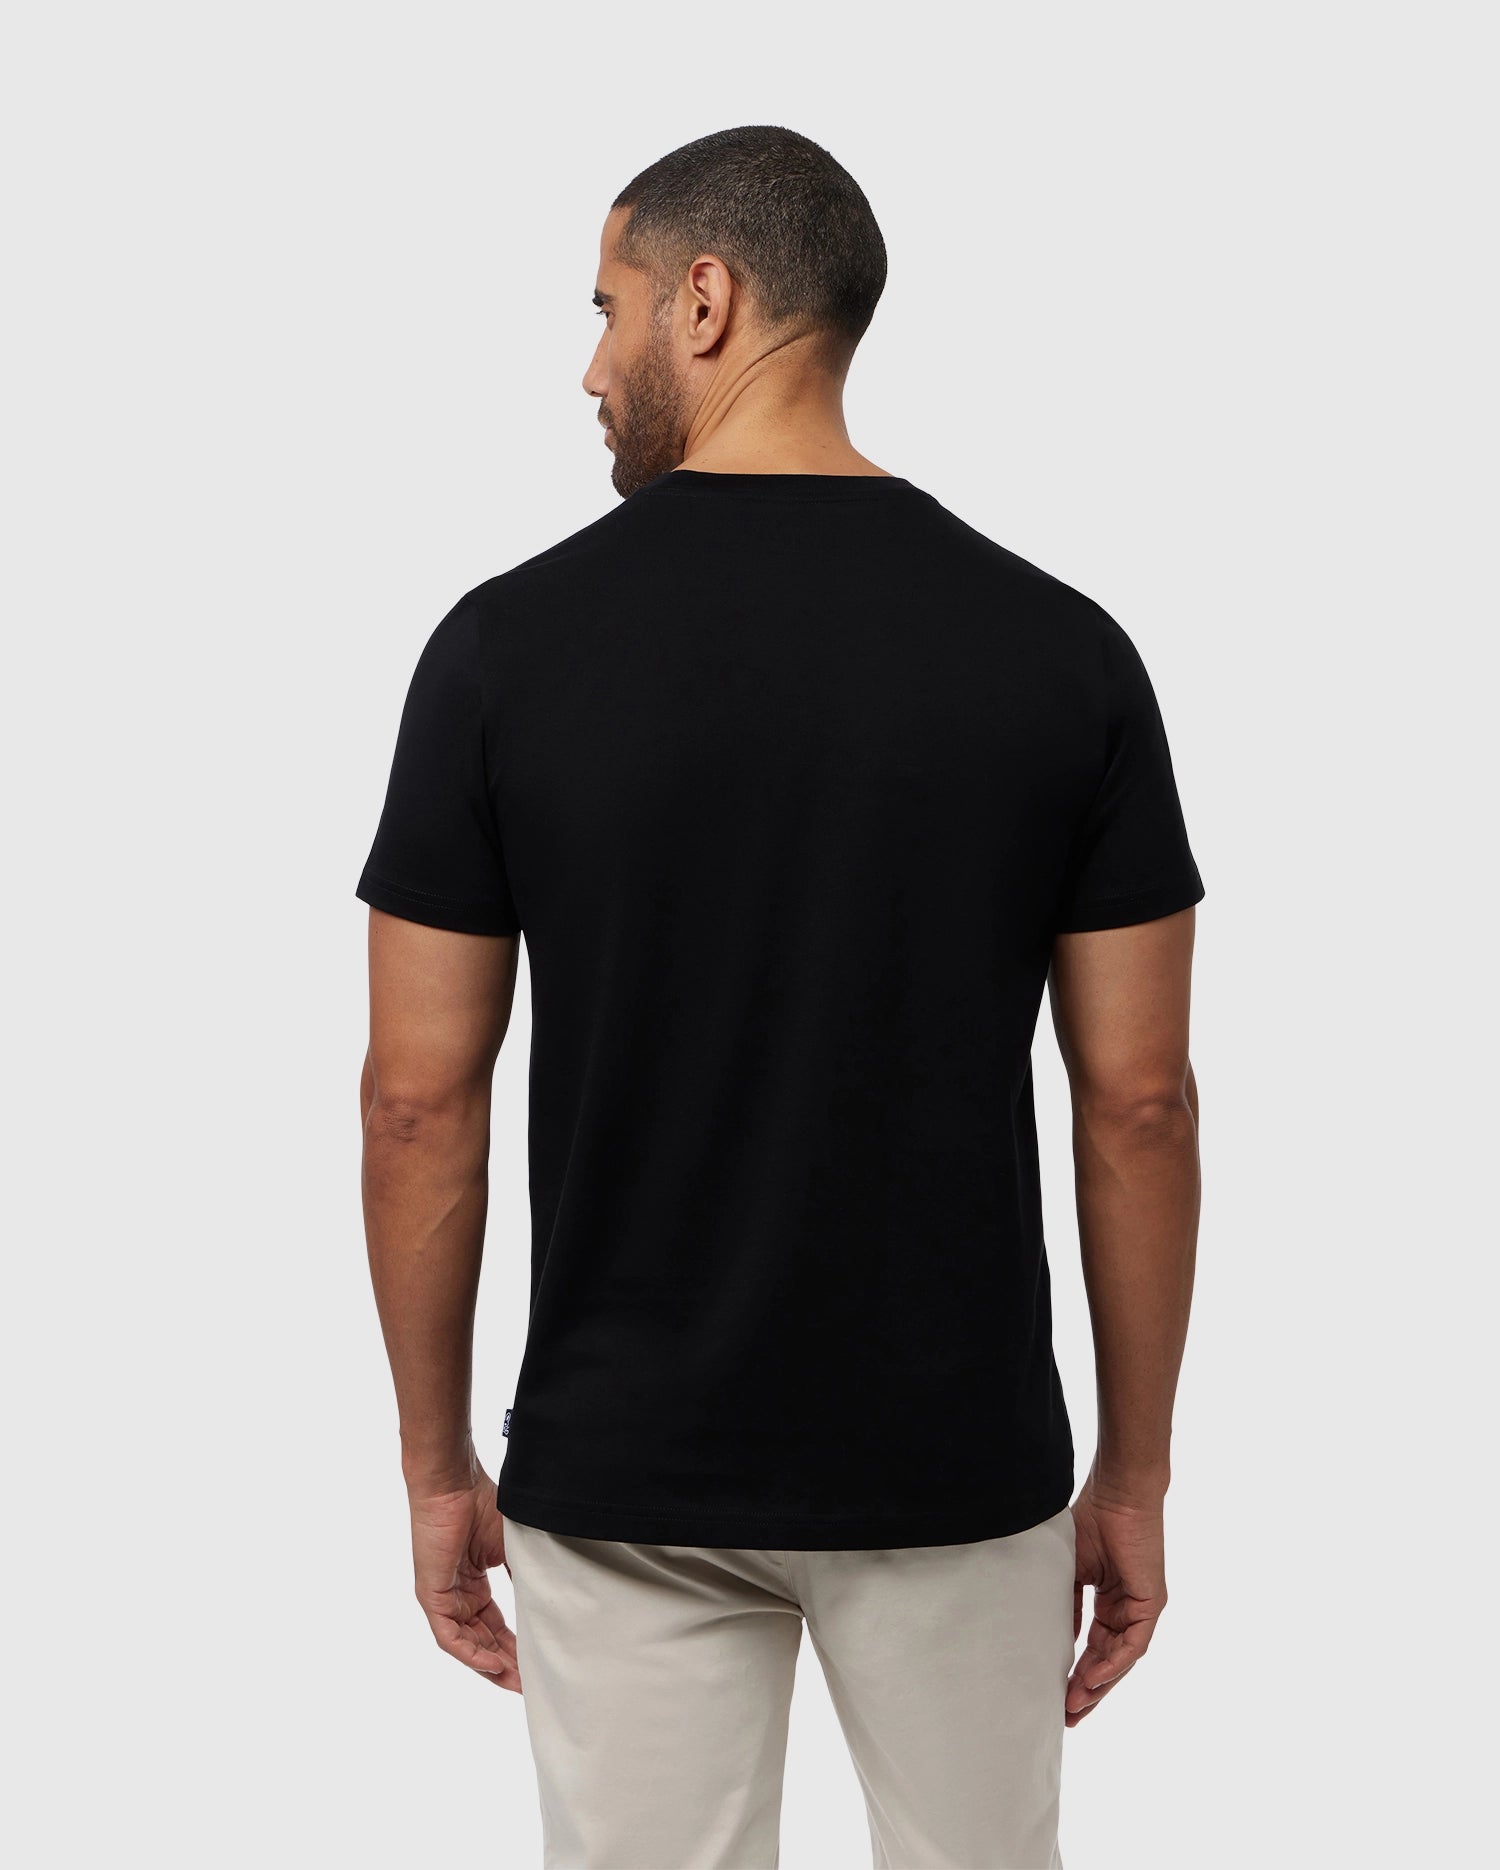 Buy Hotfits Graphic Print Men's Round Neck Black T-Shirt Online at Low  Prices in India 